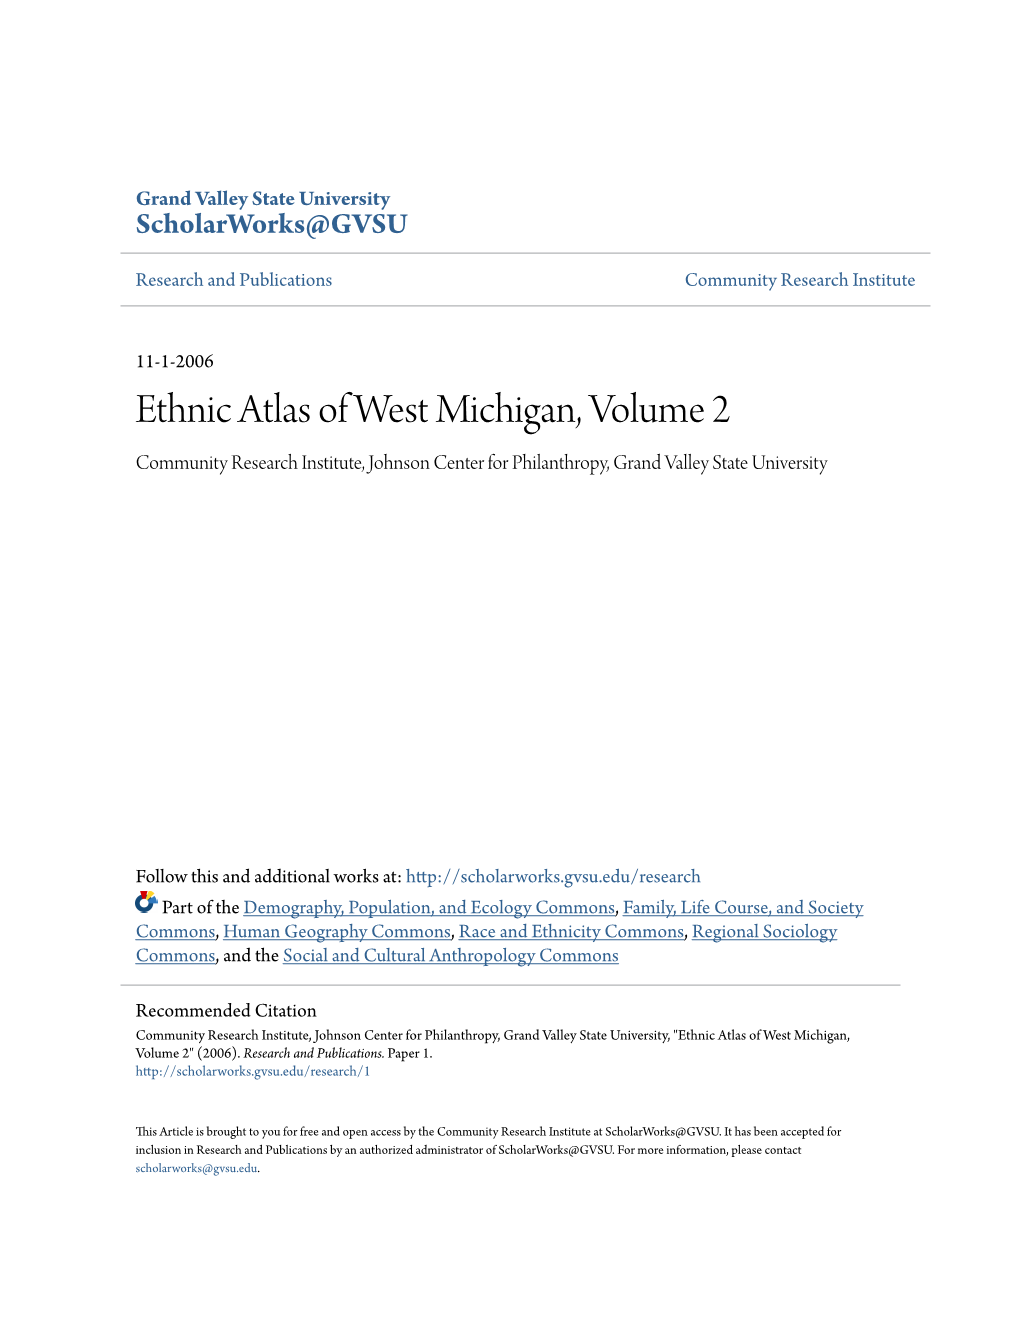 Ethnic Atlas of West Michigan, Volume 2 Community Research Institute, Johnson Center for Philanthropy, Grand Valley State University